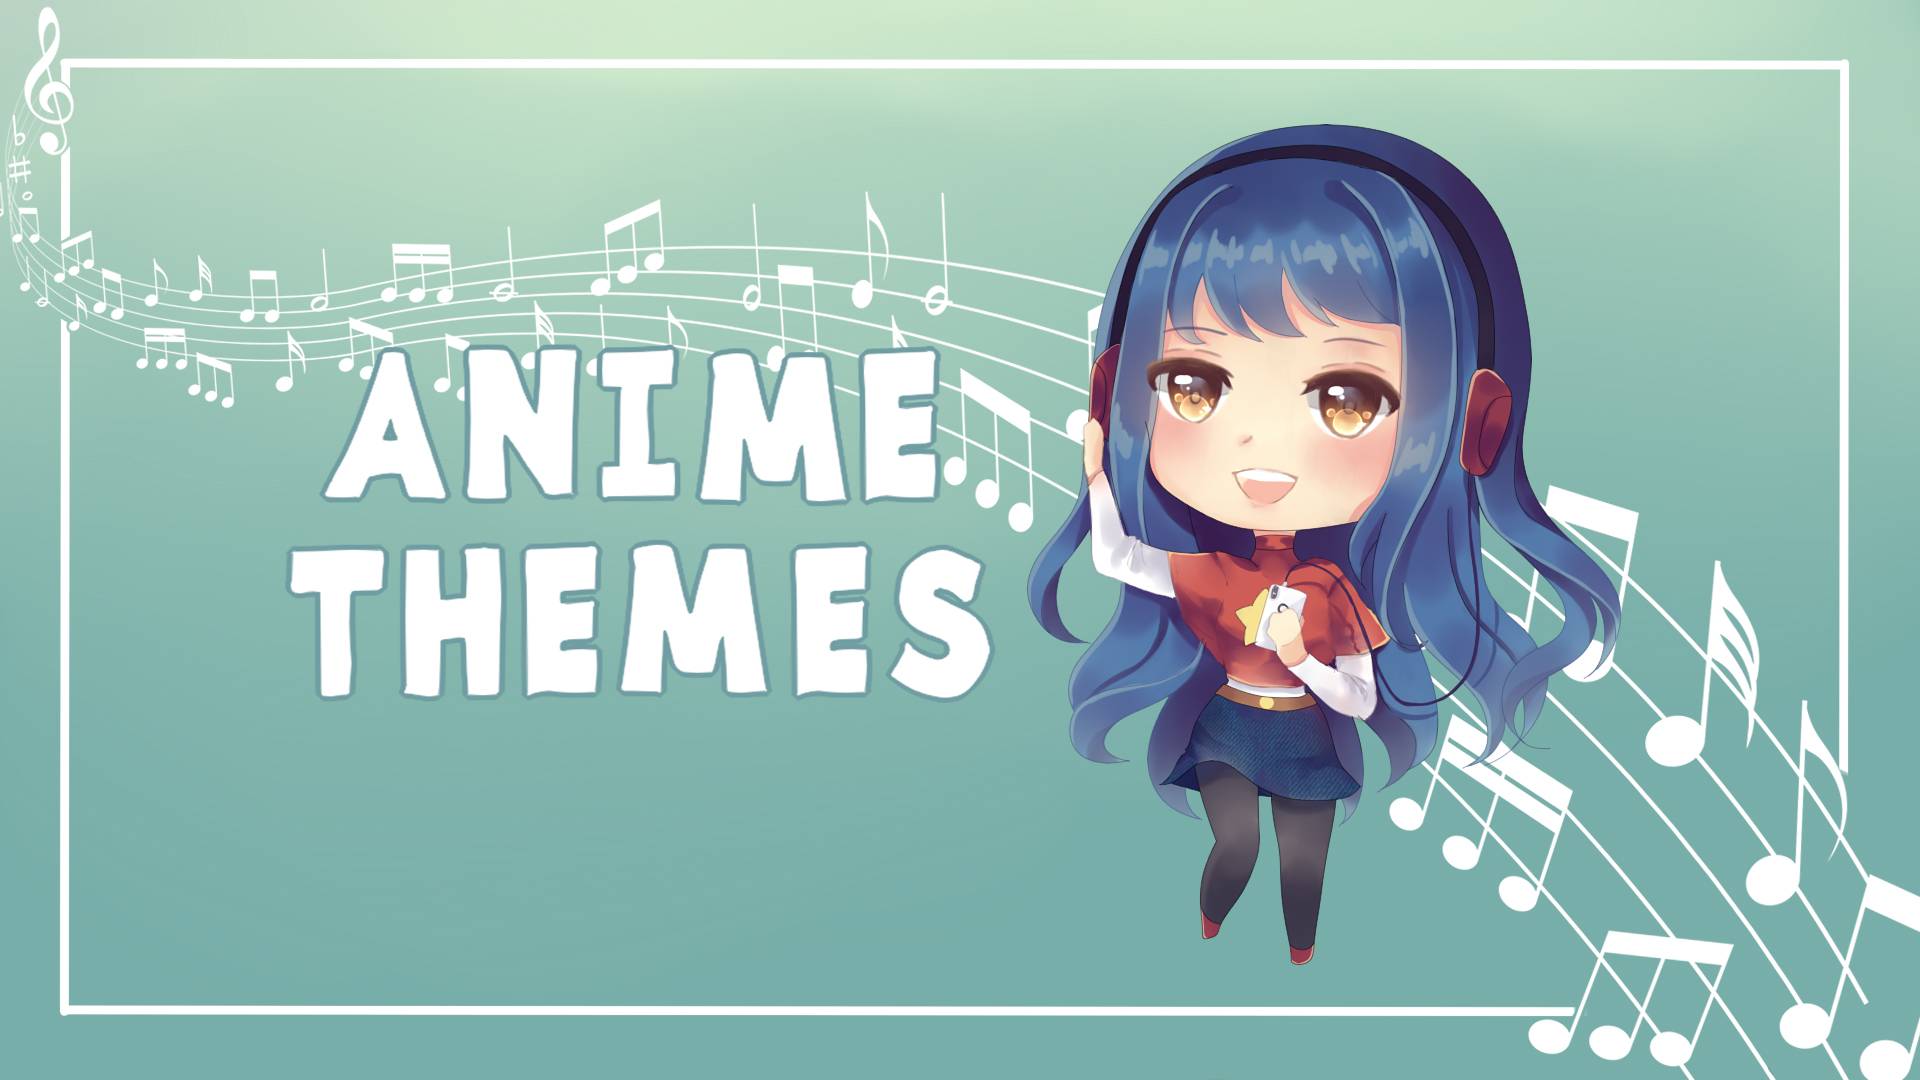 100 Anime songs in 30 minutes - Halcyon Music Sheet music for Piano (Solo)  | Musescore.com